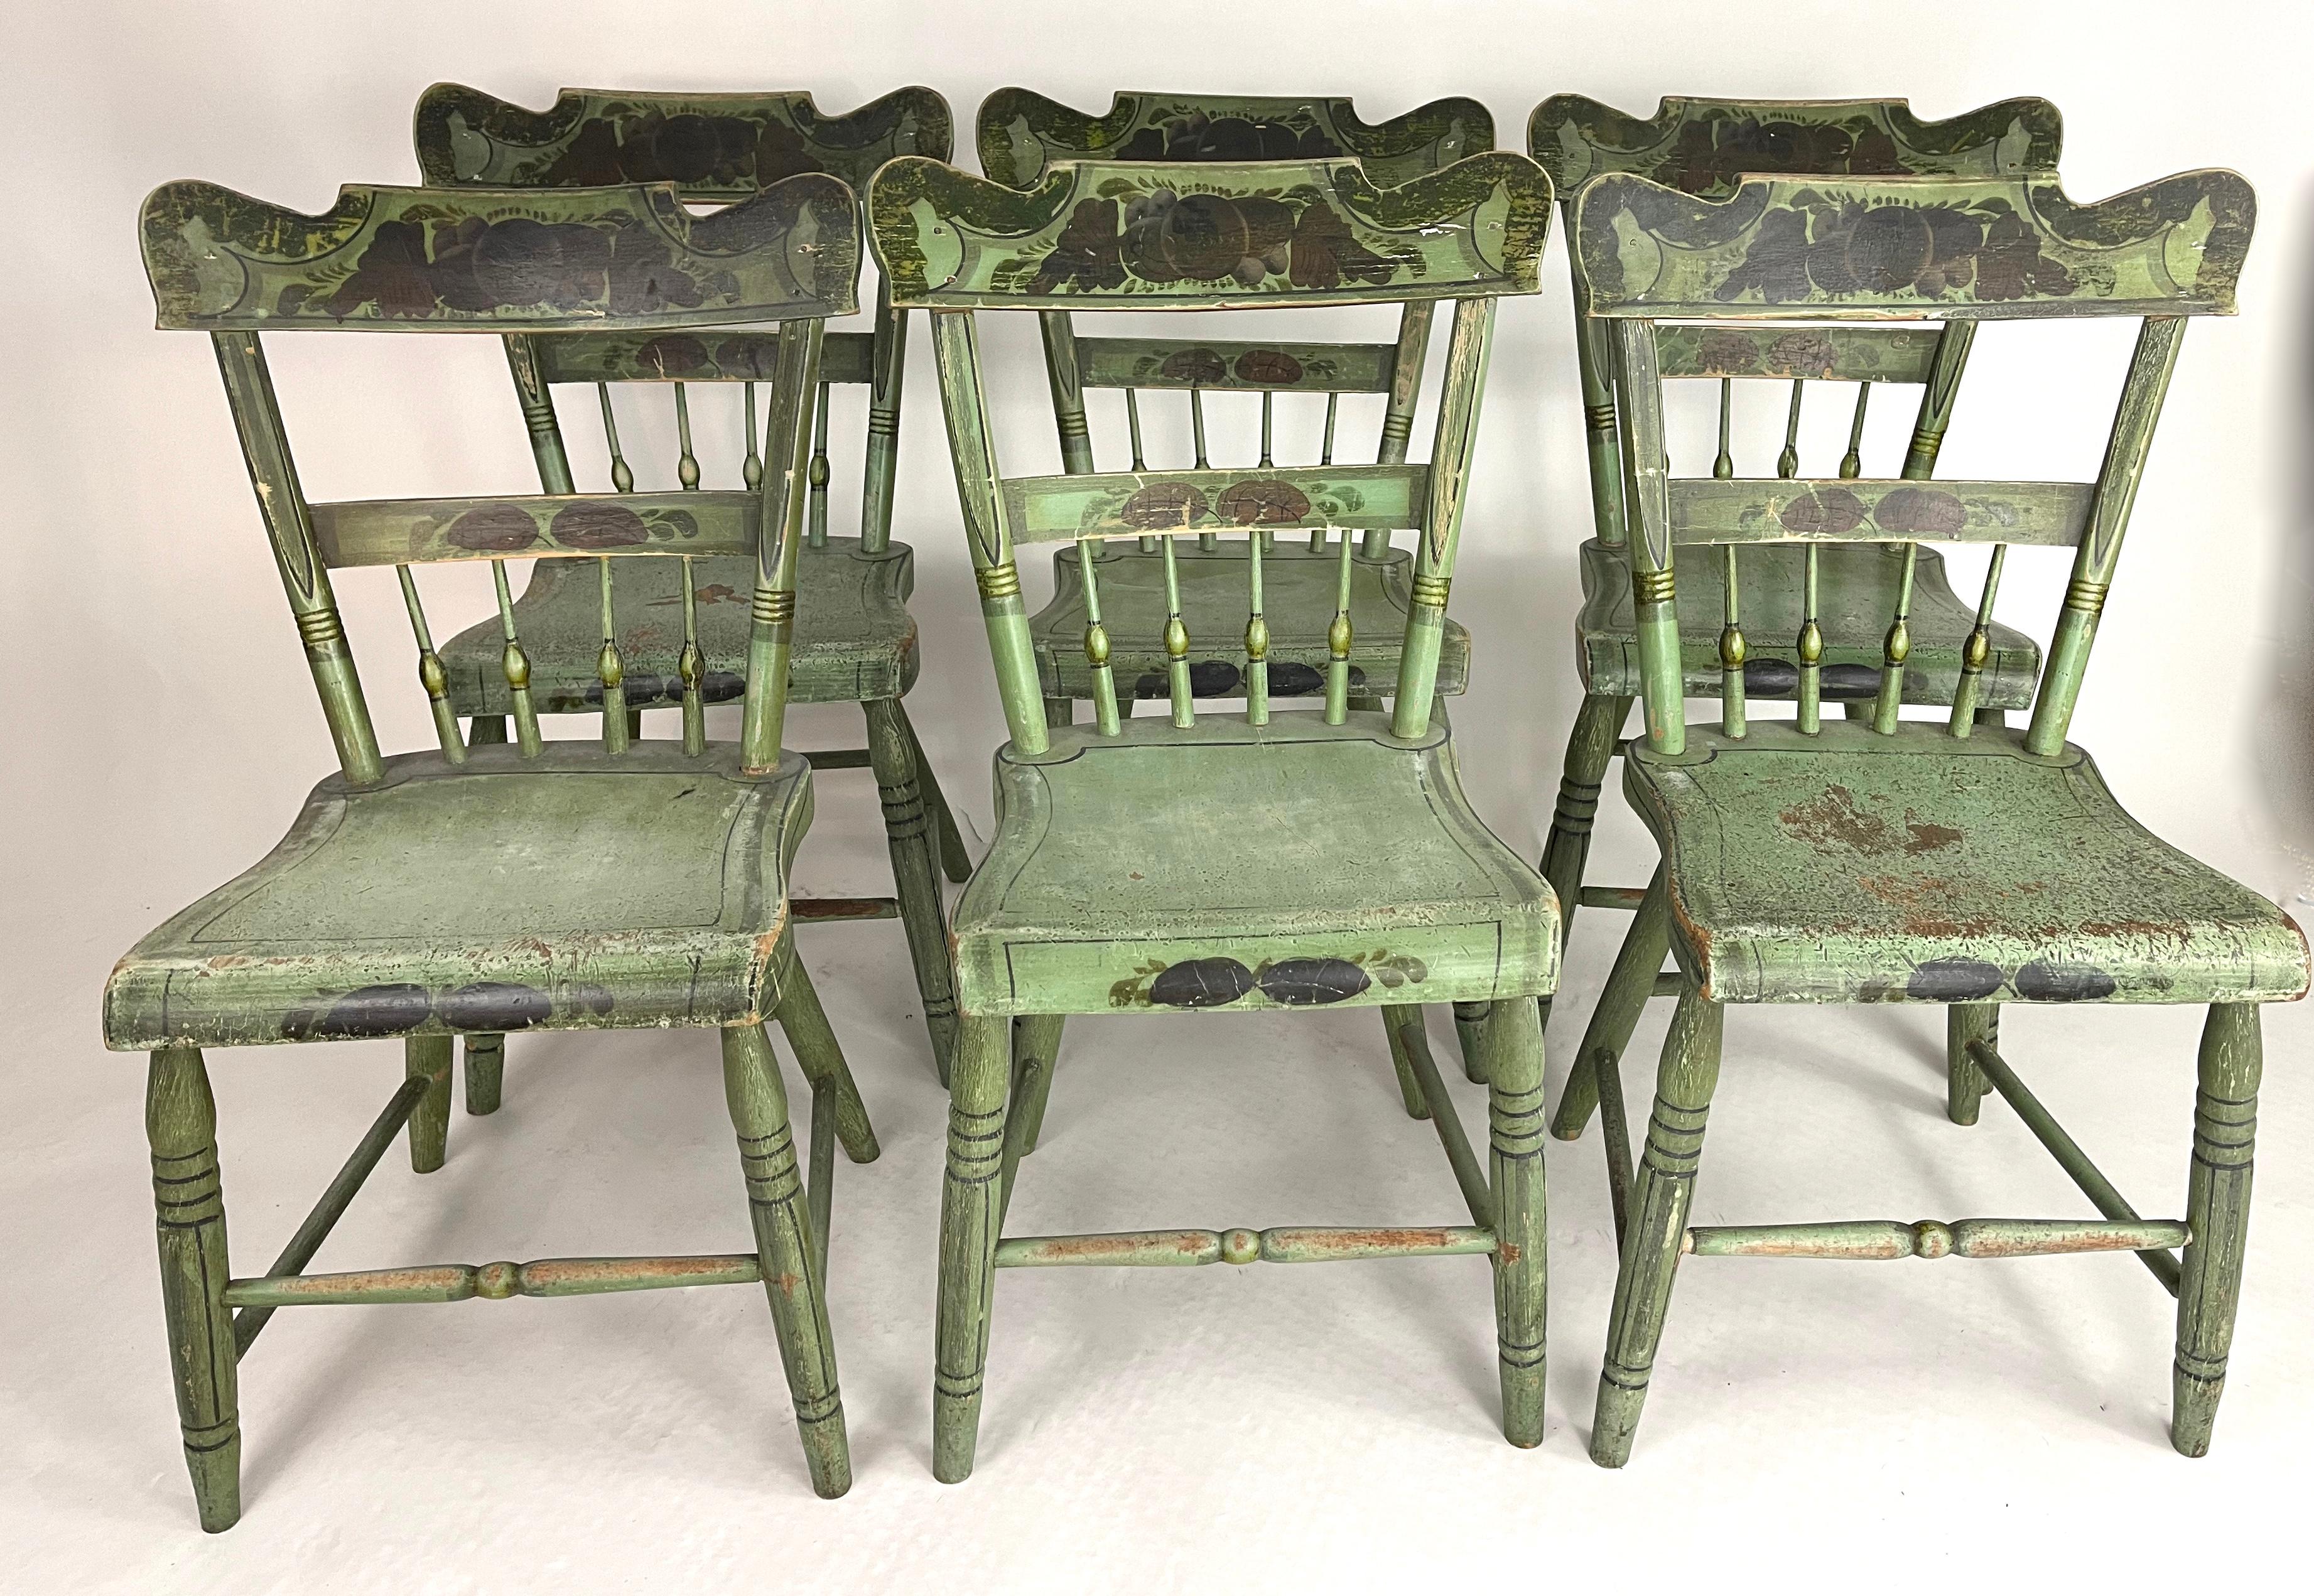 Set of 6 19th Century American Country Green Painted Dining Chairs, c. 1820-30 12